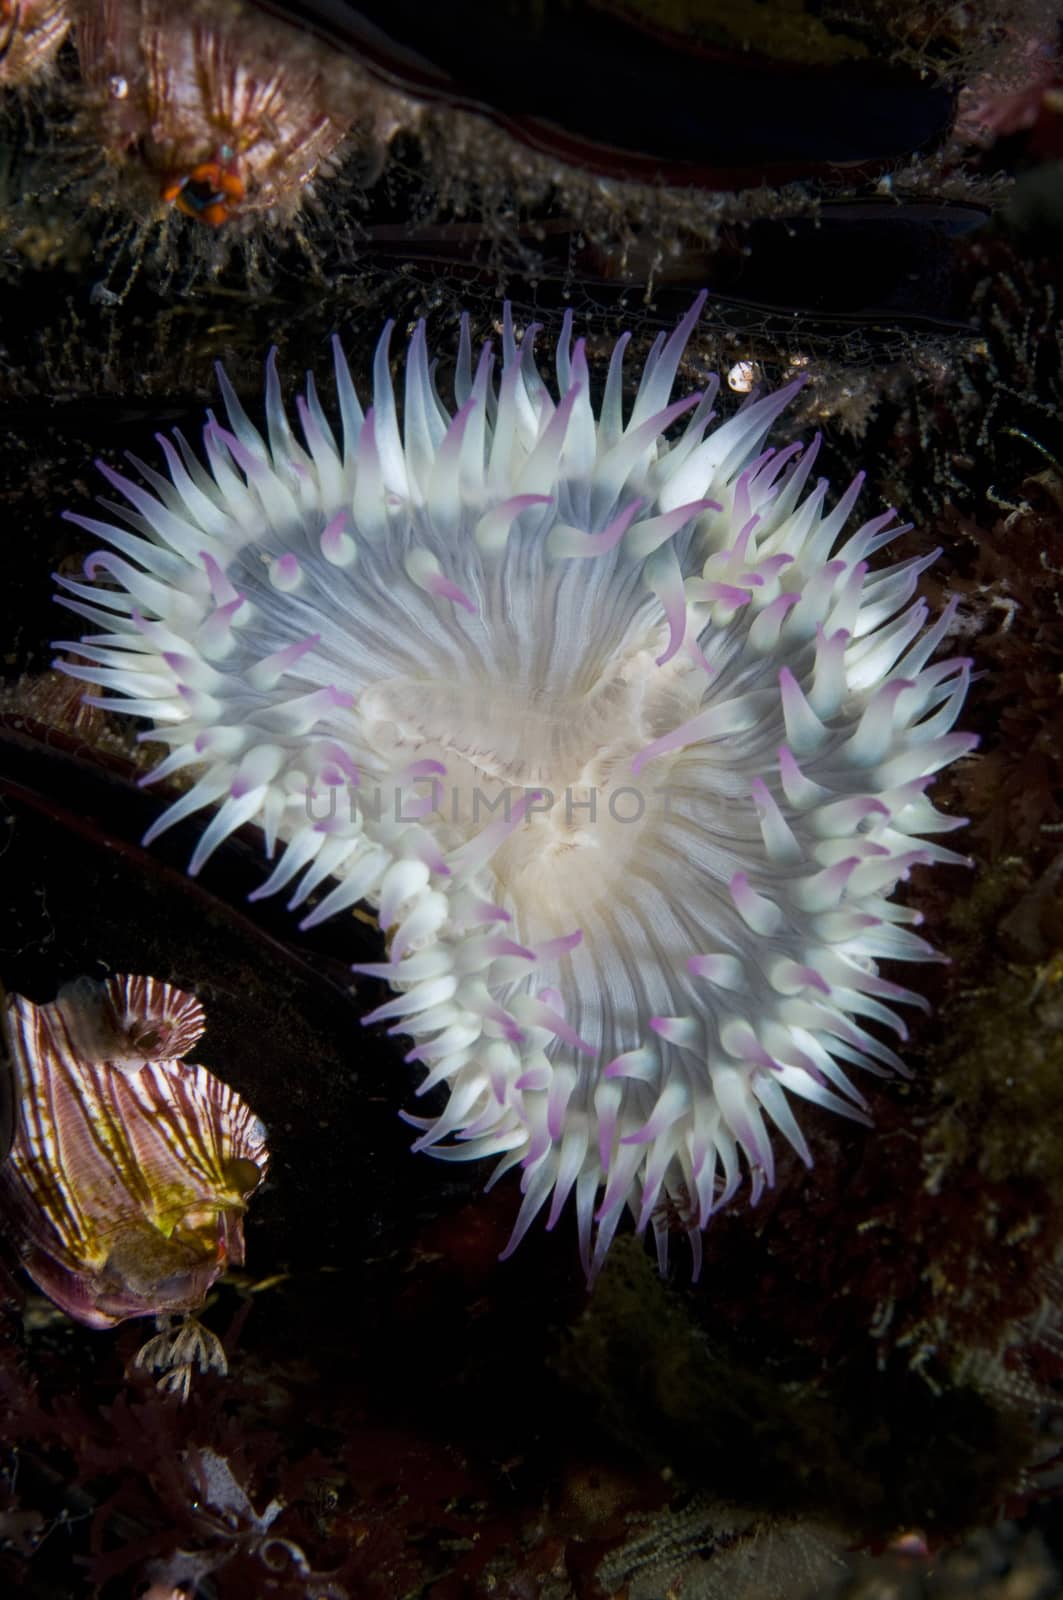 Aggregating Anemone (Anthopleura elegantissima) found attatched to rocks, pier pilings, and other man made structures.